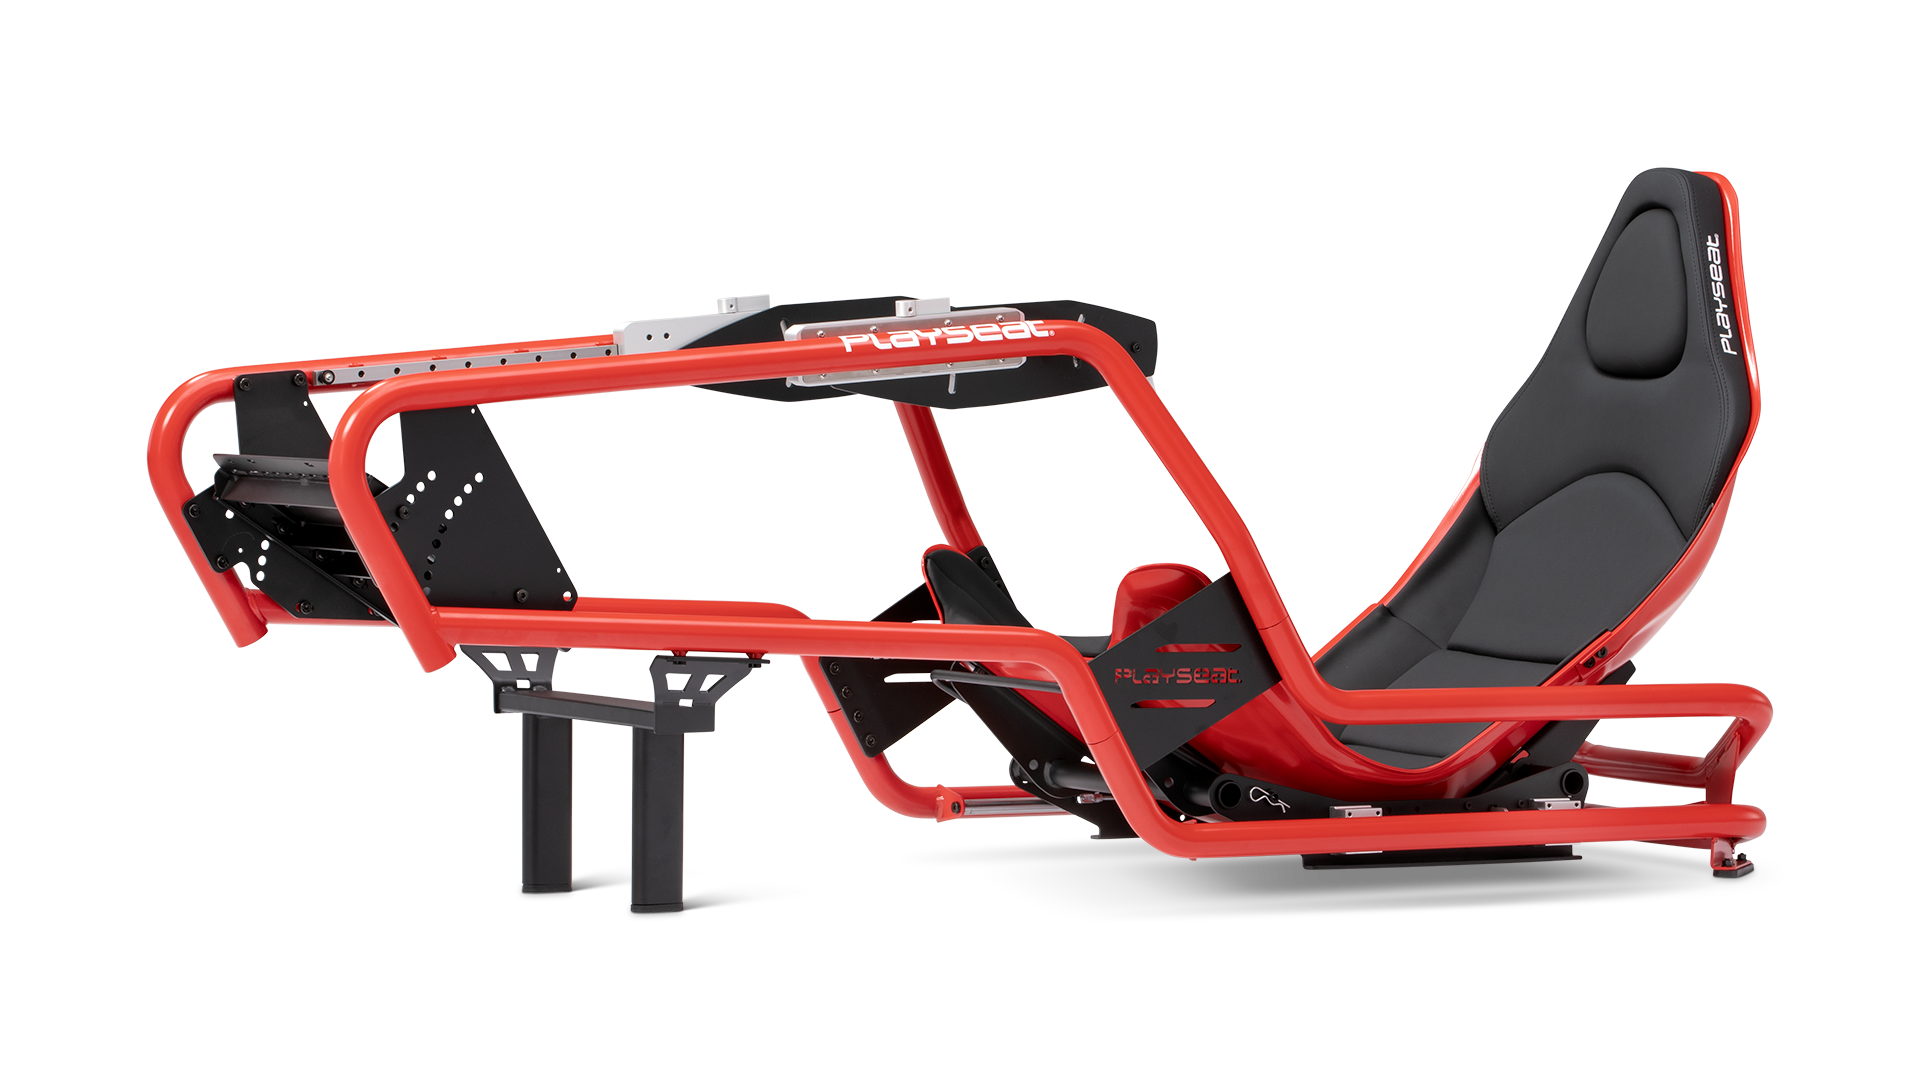 playseat-formula-intelligence-red-f1-simulator-front-angle-view-1920x1080-5.png